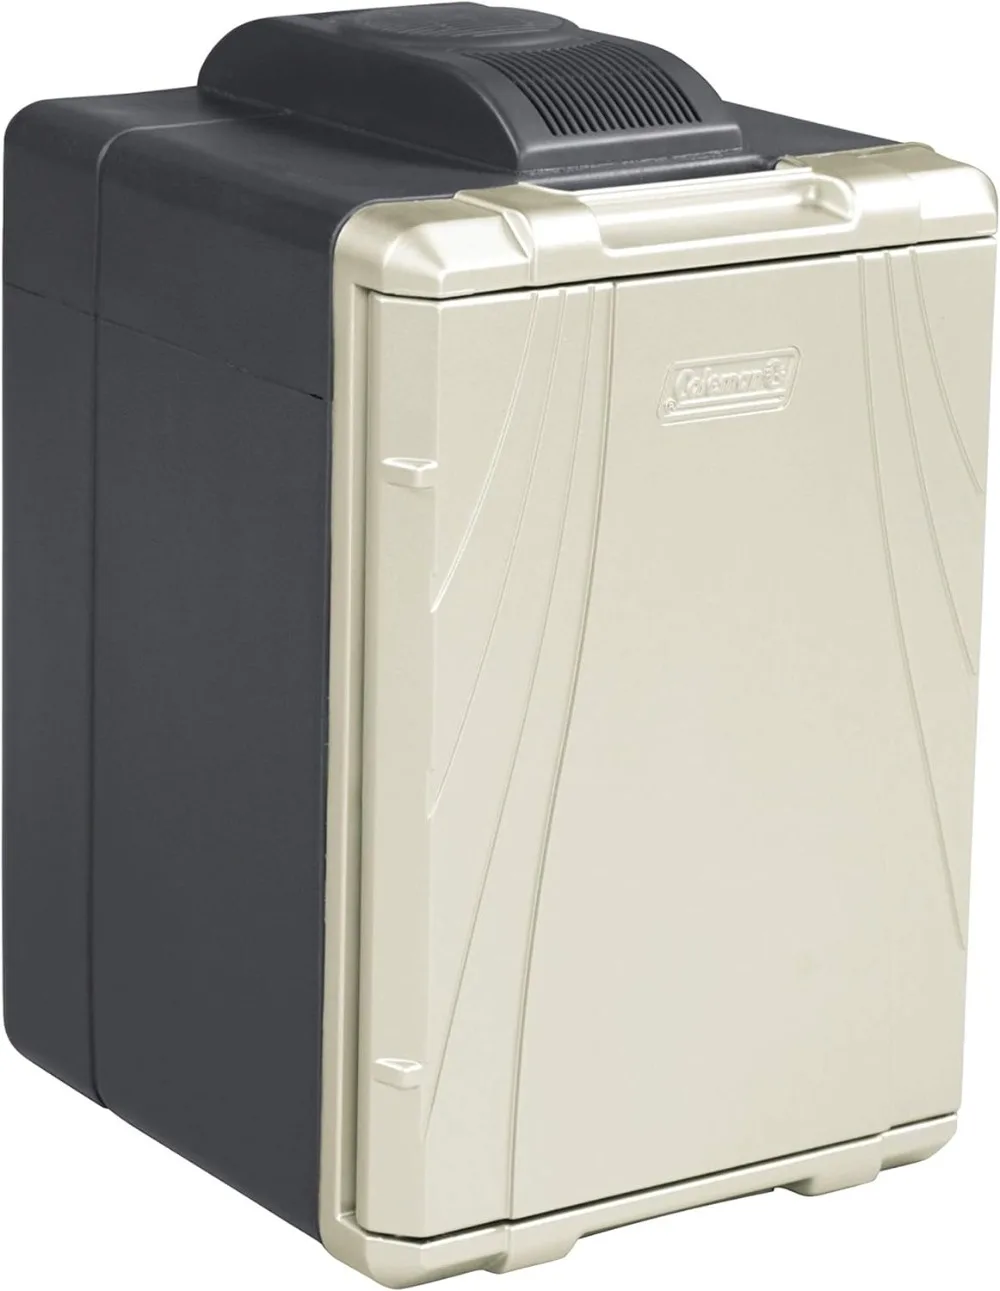 

40qt Thermoelectric Cooler & Warmer, Hot/Cold Cooler Keeps Contents up to 40°F Cooler or 140°F Hotter Than Surrounding